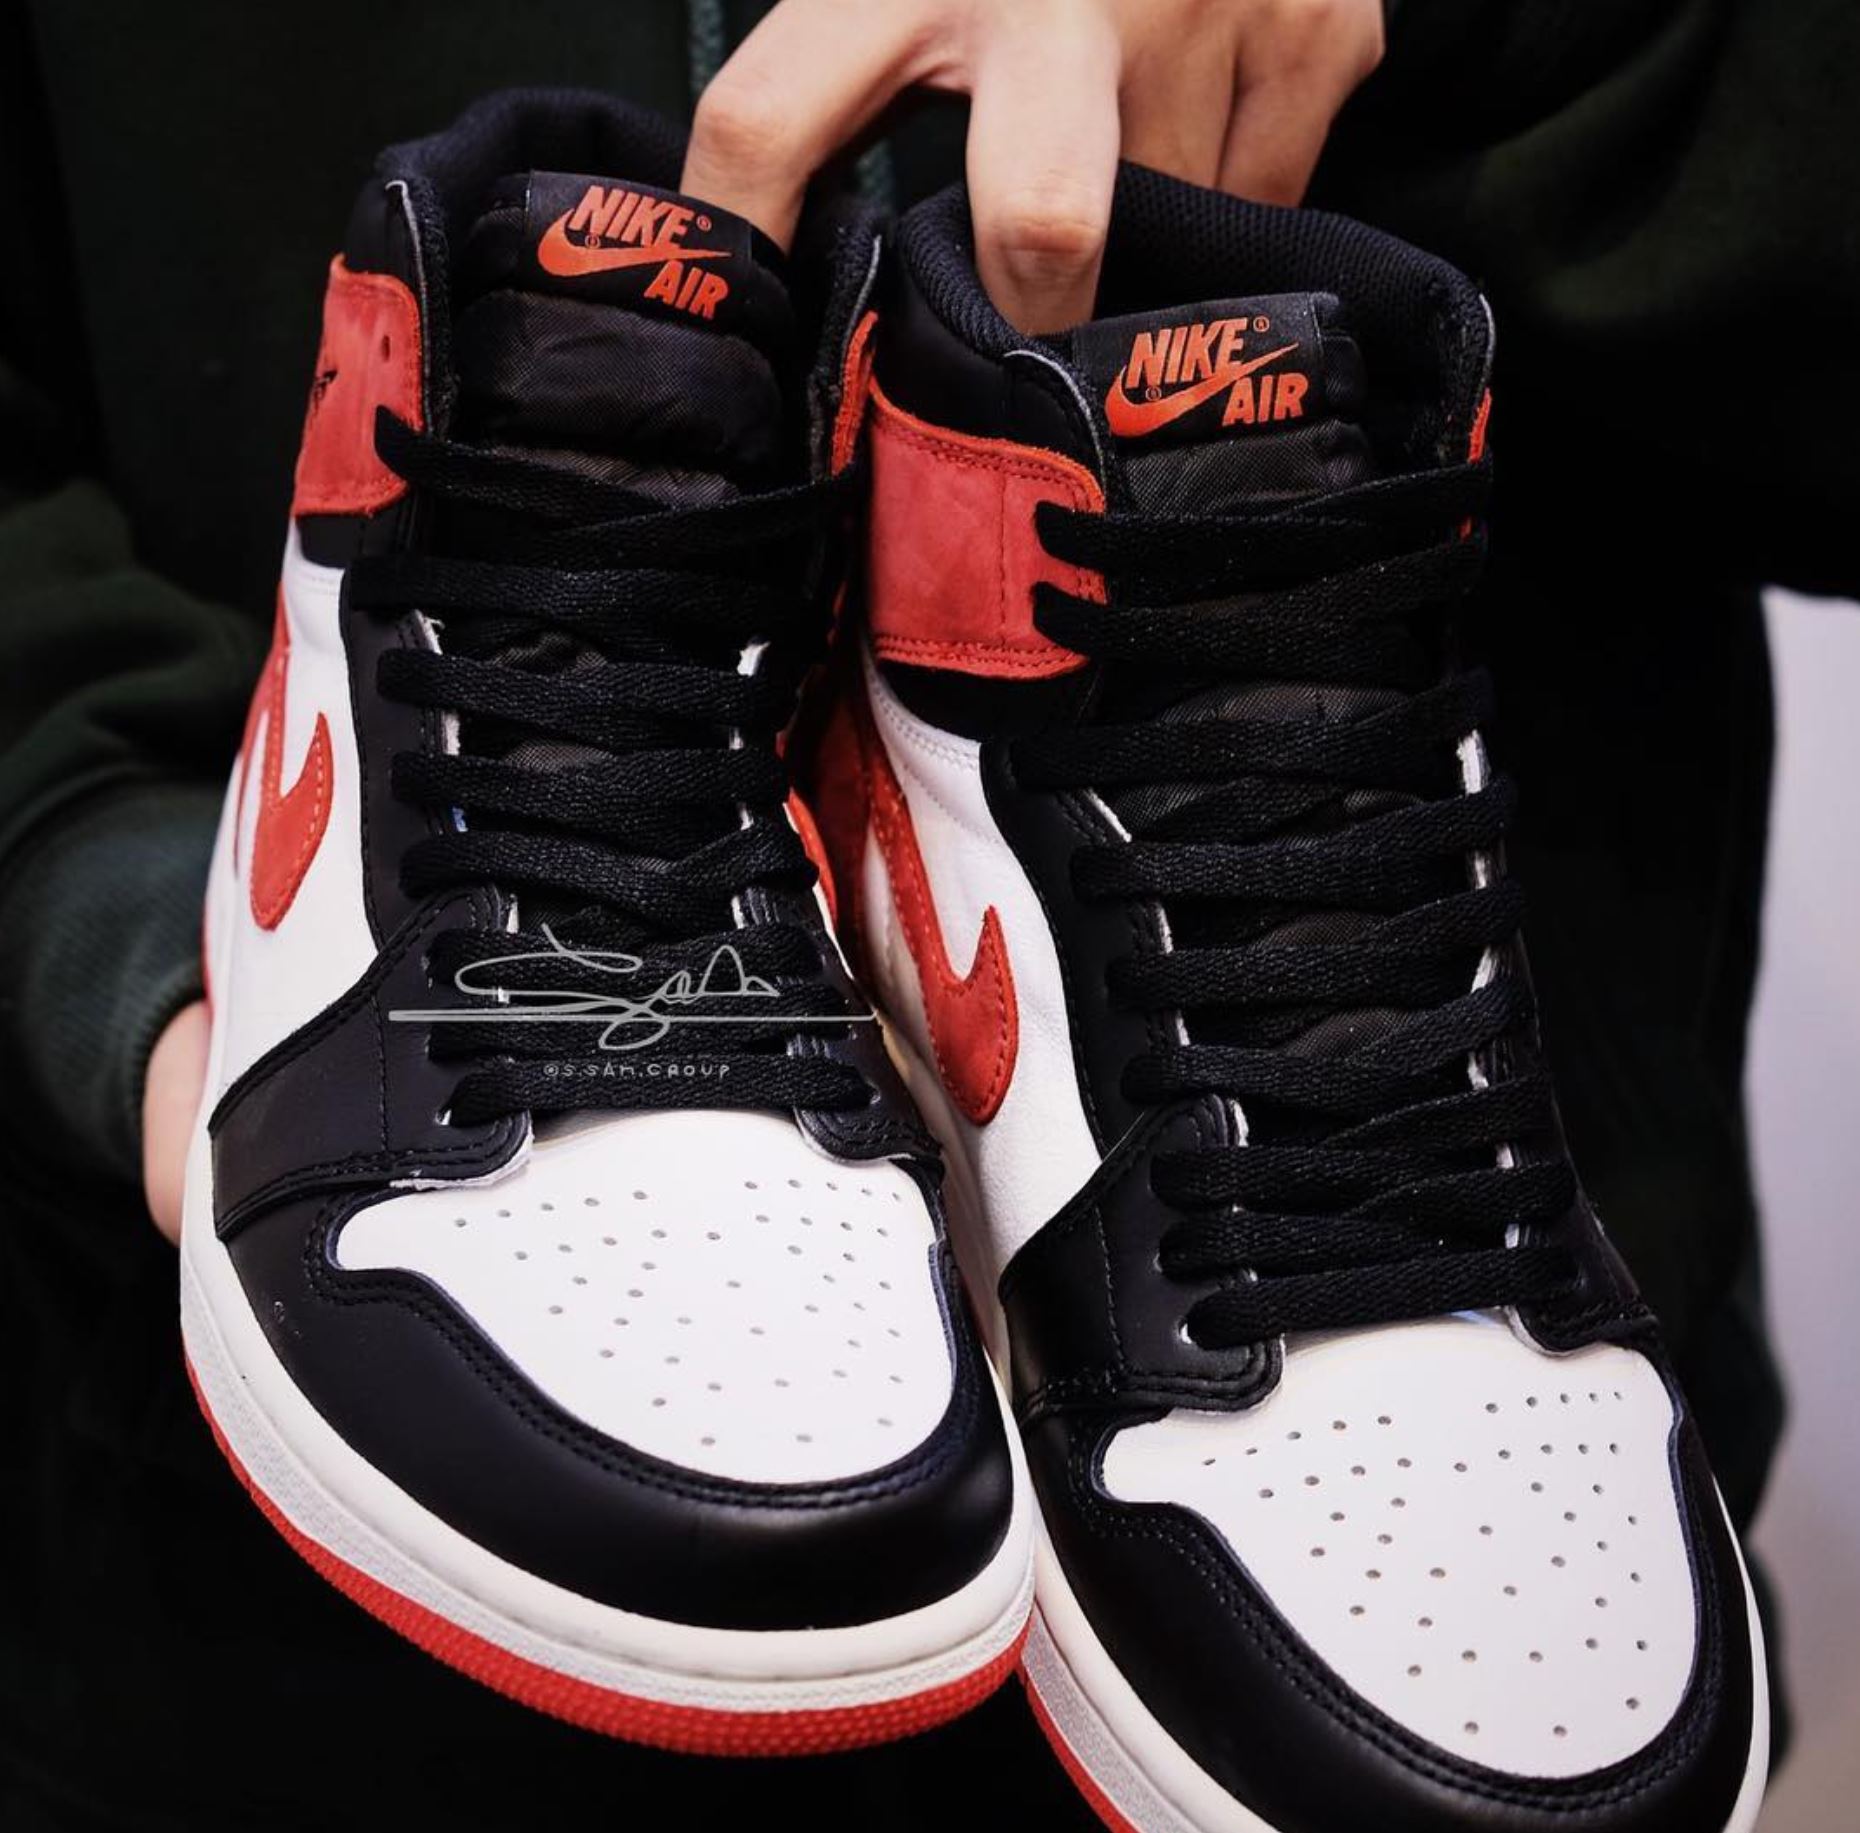 frase Guiño inercia The Air Jordan 1 '6 Rings' Flaunts Suede Accents - WearTesters